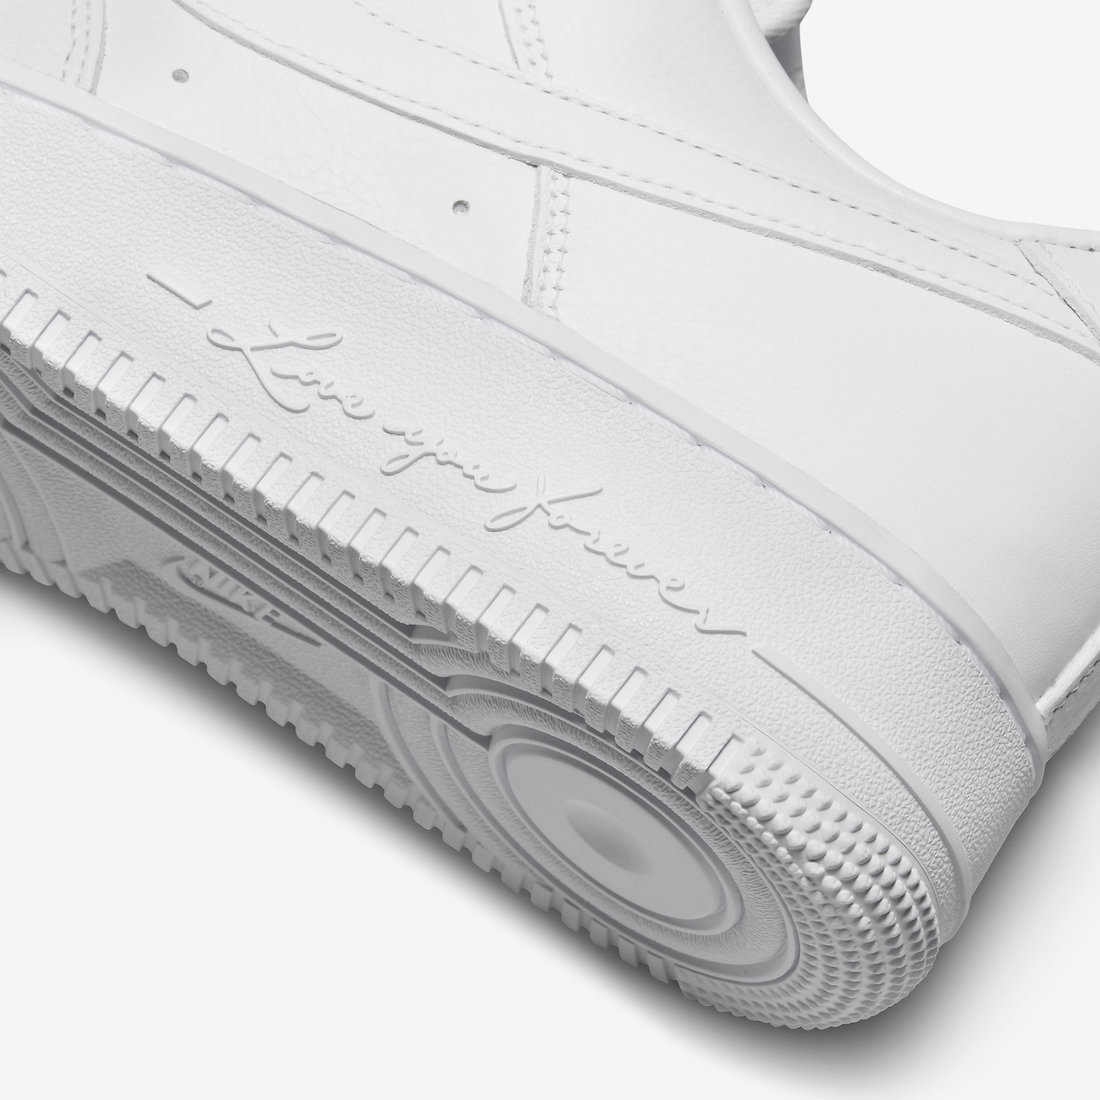 Drake's NOCTA x Nike Air Force 1 Sneakers Are Restocking